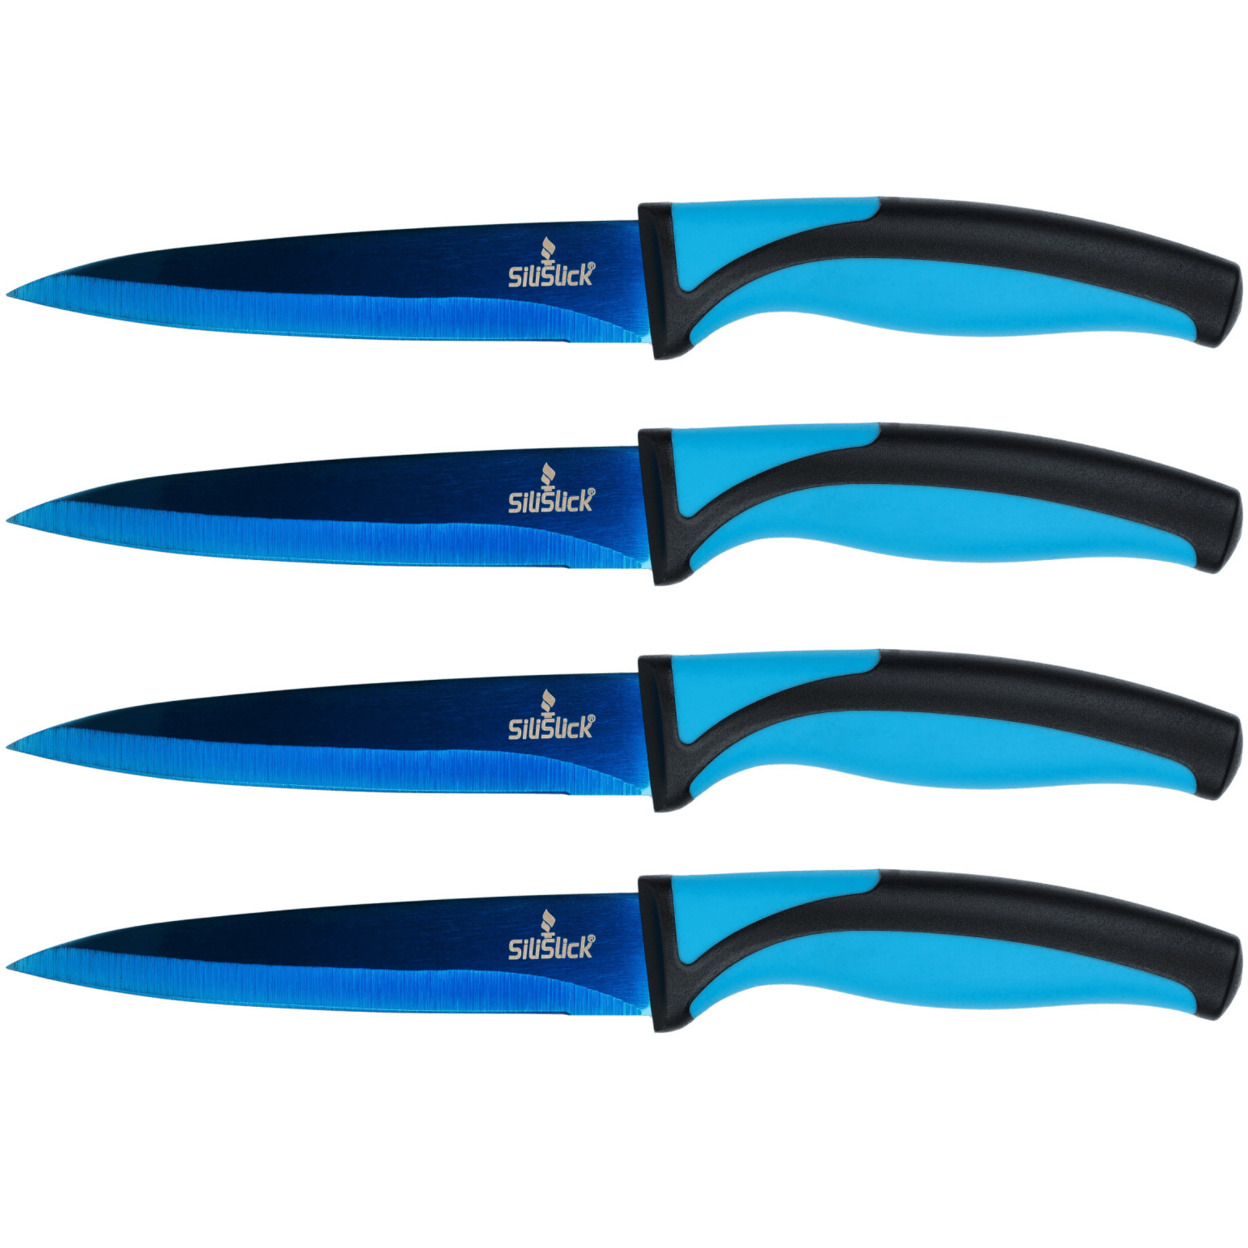 SiliSlick Stainless Steel Steak Knife Blue Handle And Blade Set Of 4 - Titanium Coated Kitchen Straight Edge For Cutting Meat